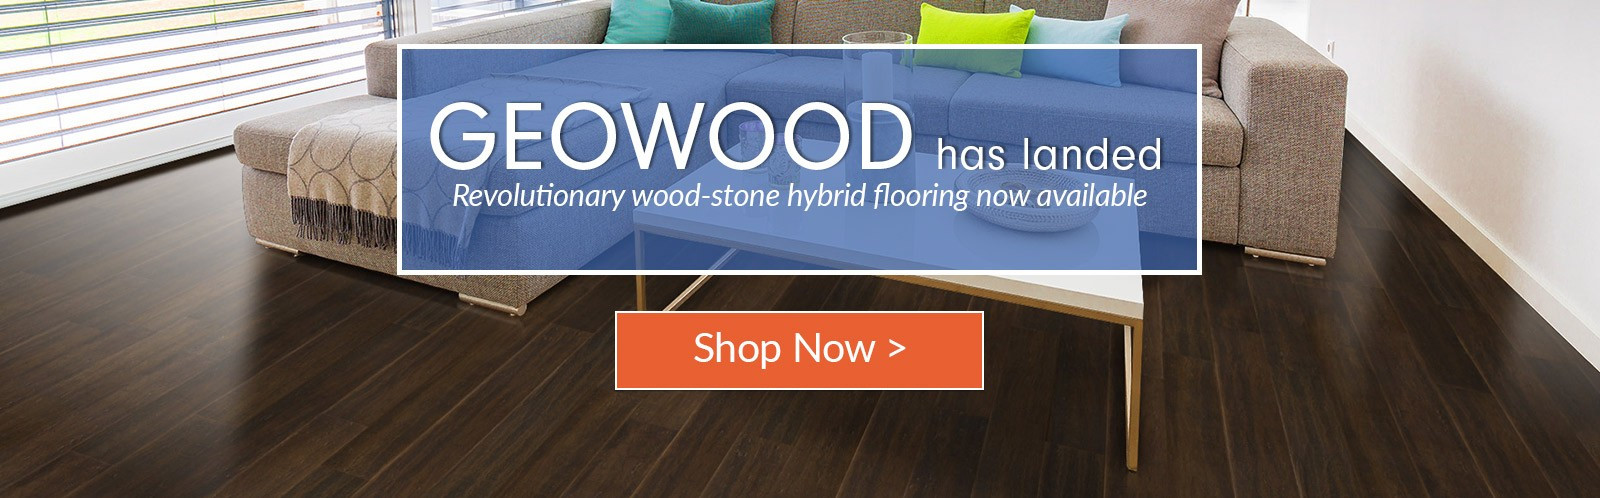 16 Stylish Hardwood Flooring Facts 2024 free download hardwood flooring facts of 13 unique bamboo hardwood floor pics dizpos com pertaining to bamboo hardwood floor awesome green building construction materials and home decor cali bamboo pics o